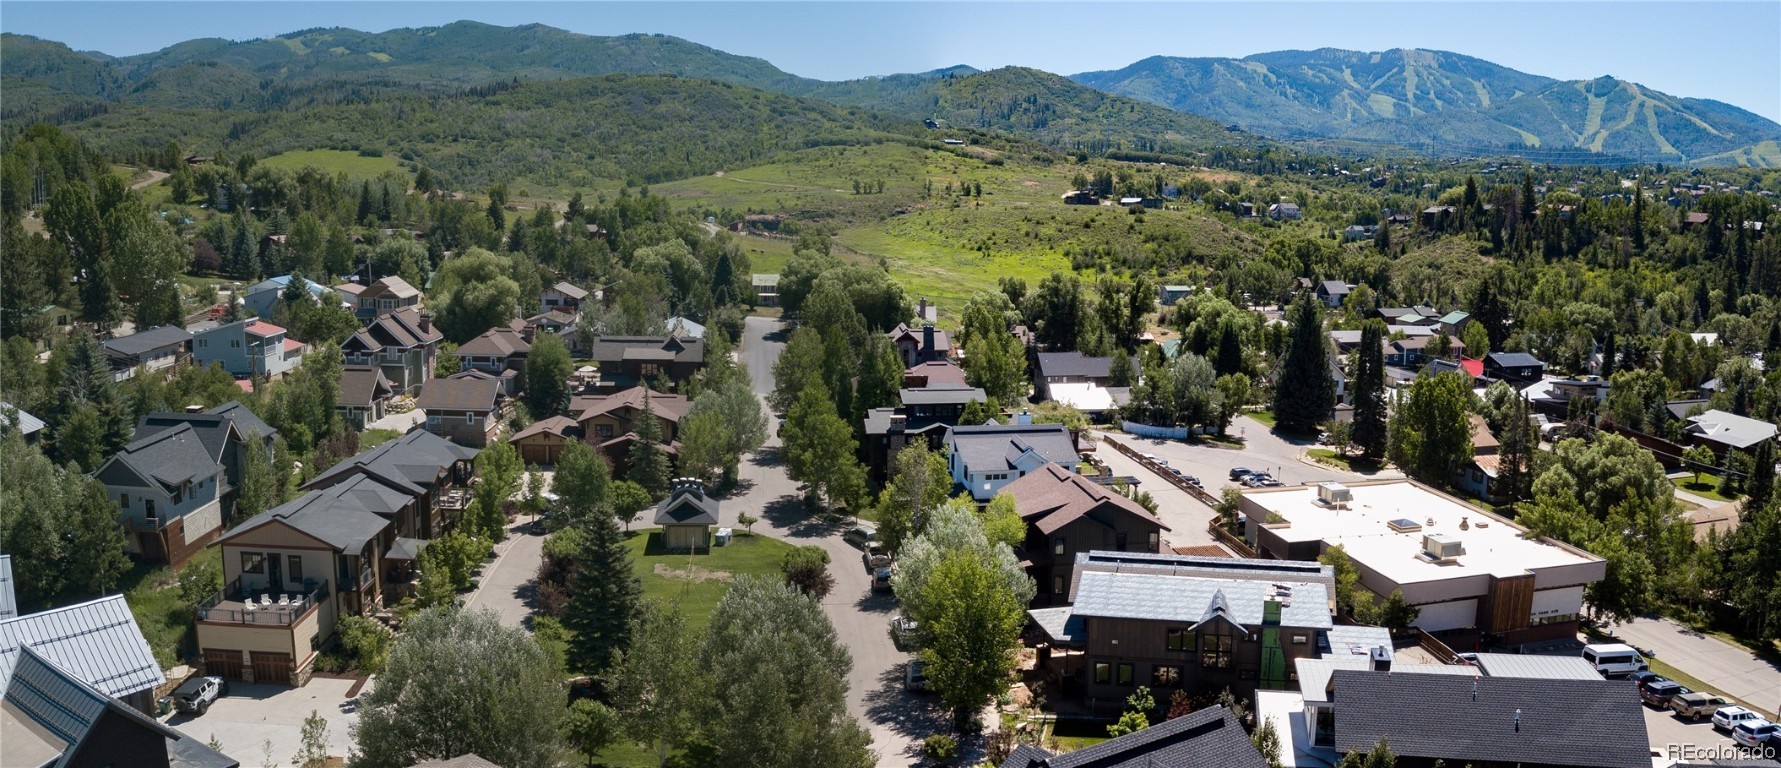 80 Park Place, Steamboat Springs, CO 80487 Listing Photo  40